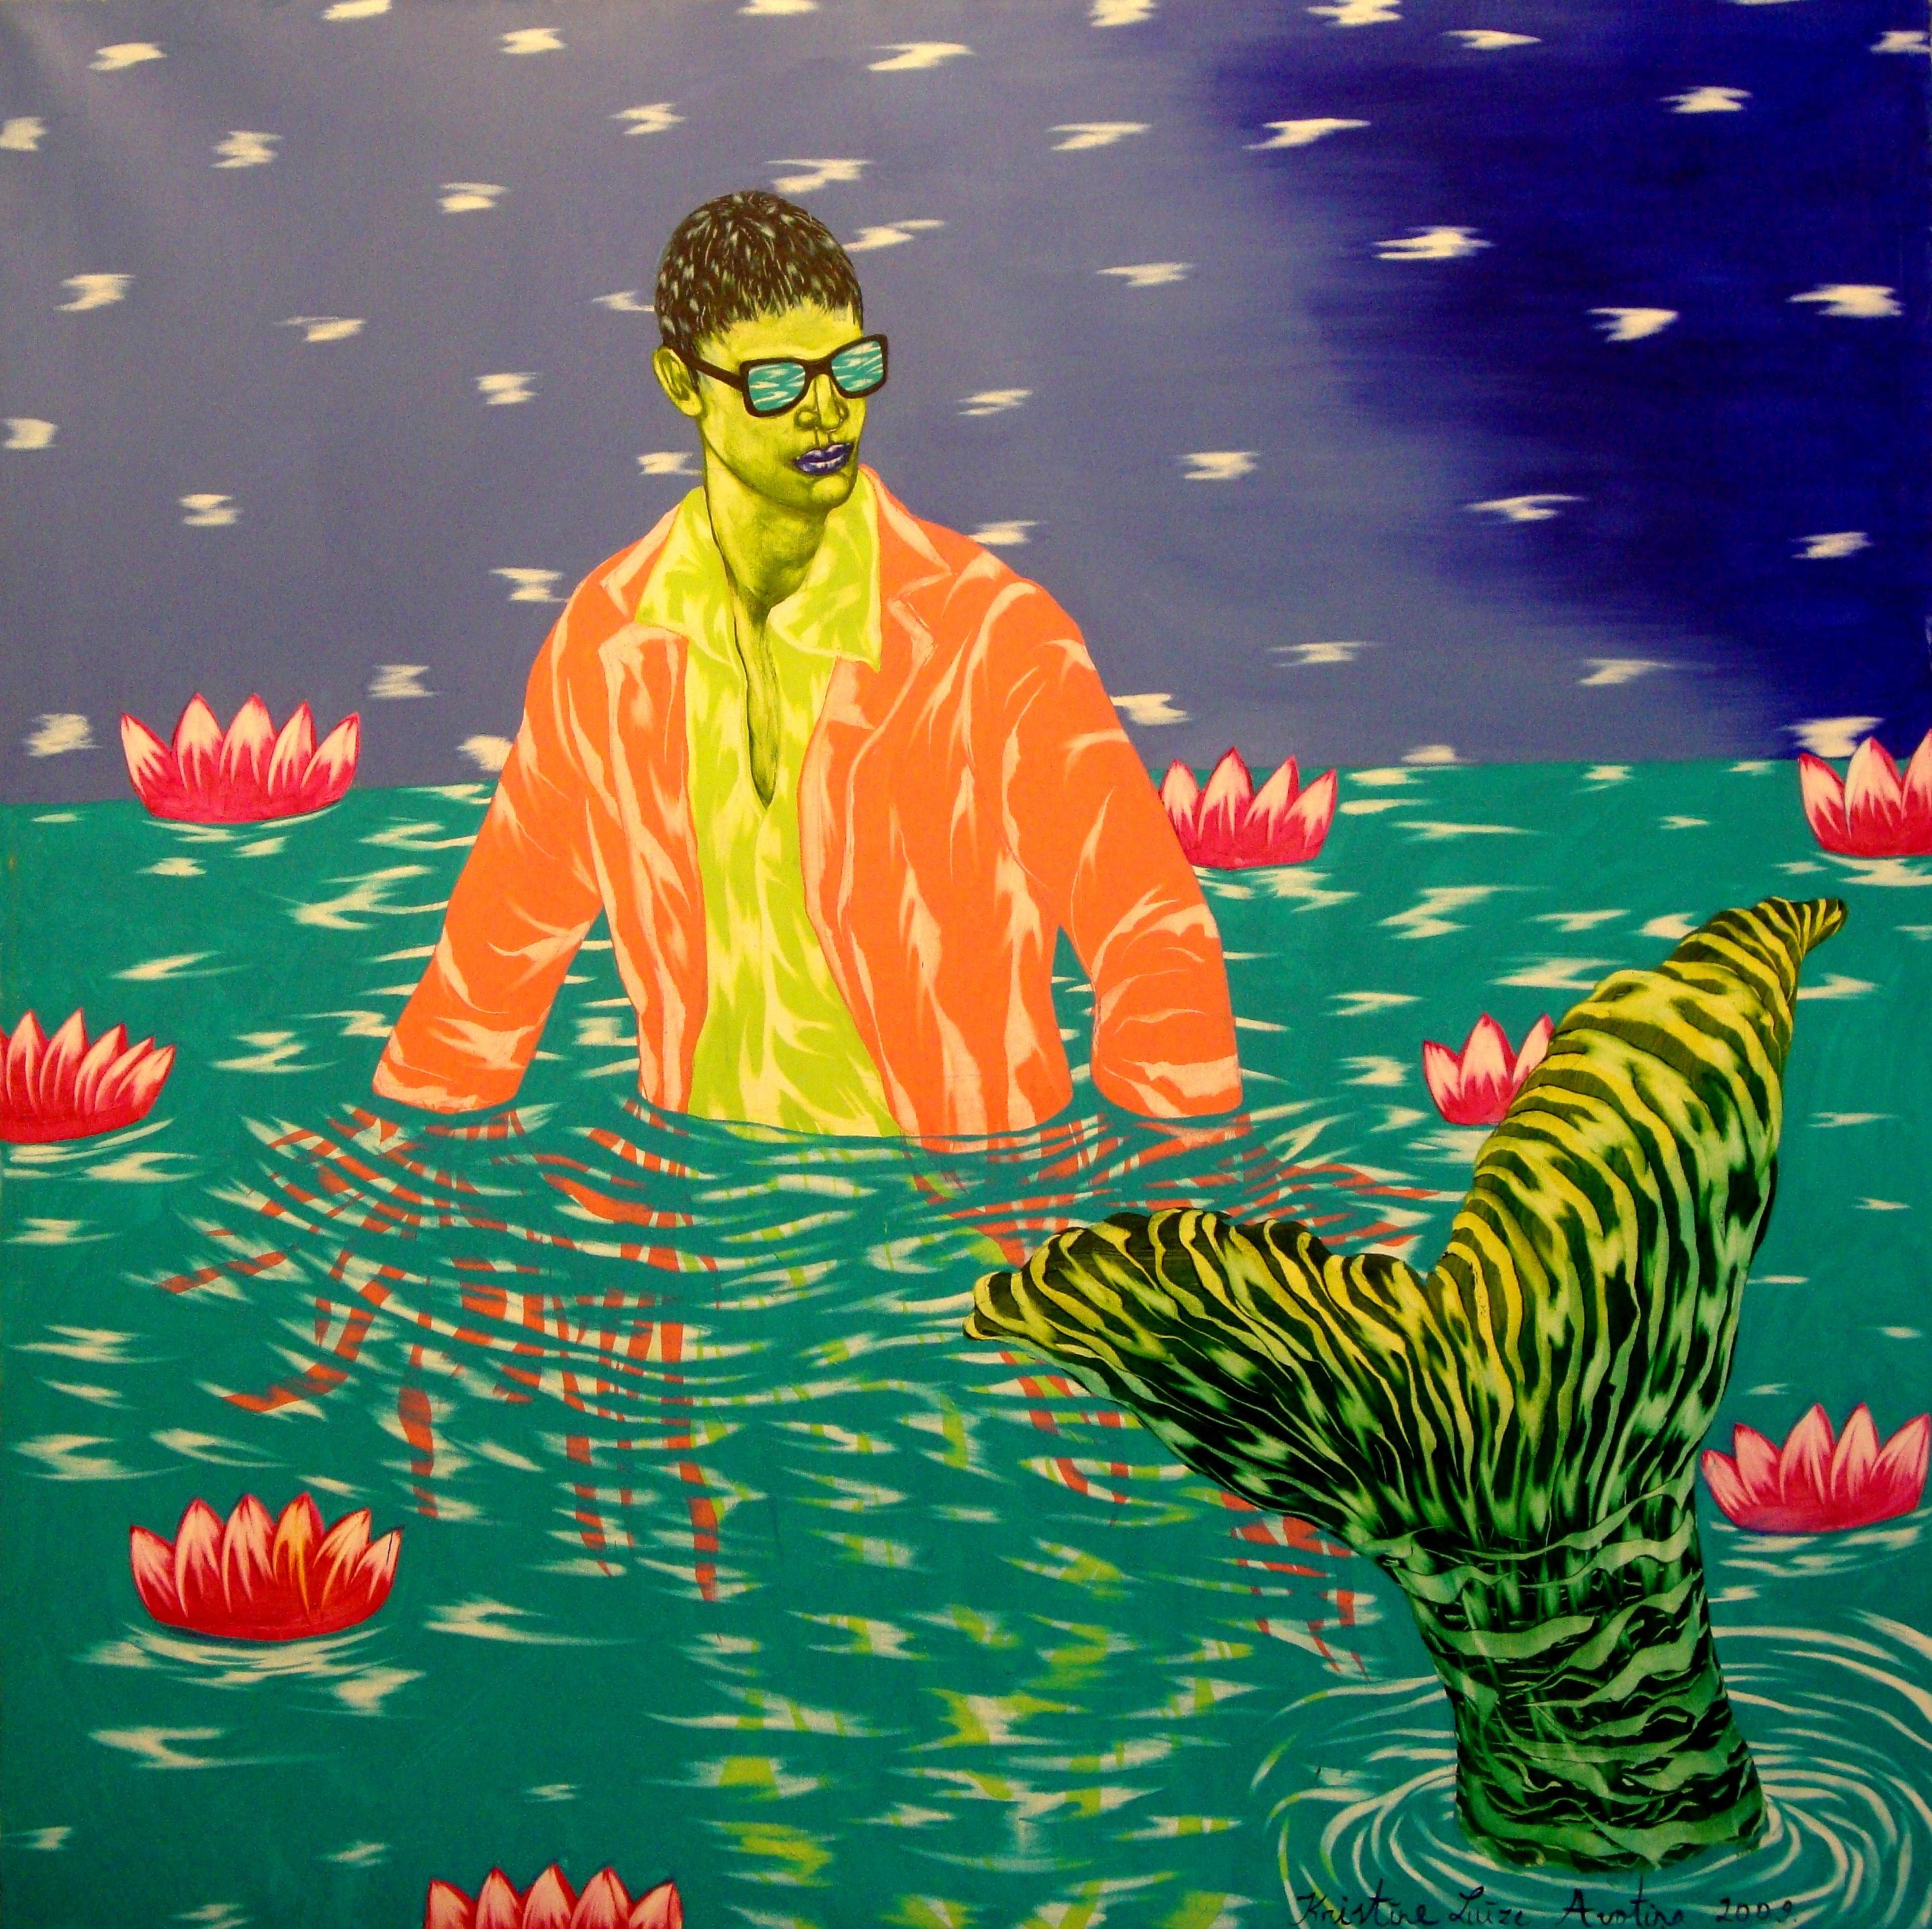 Pink glasses. 2009, oil on canvas, 130x130 cm